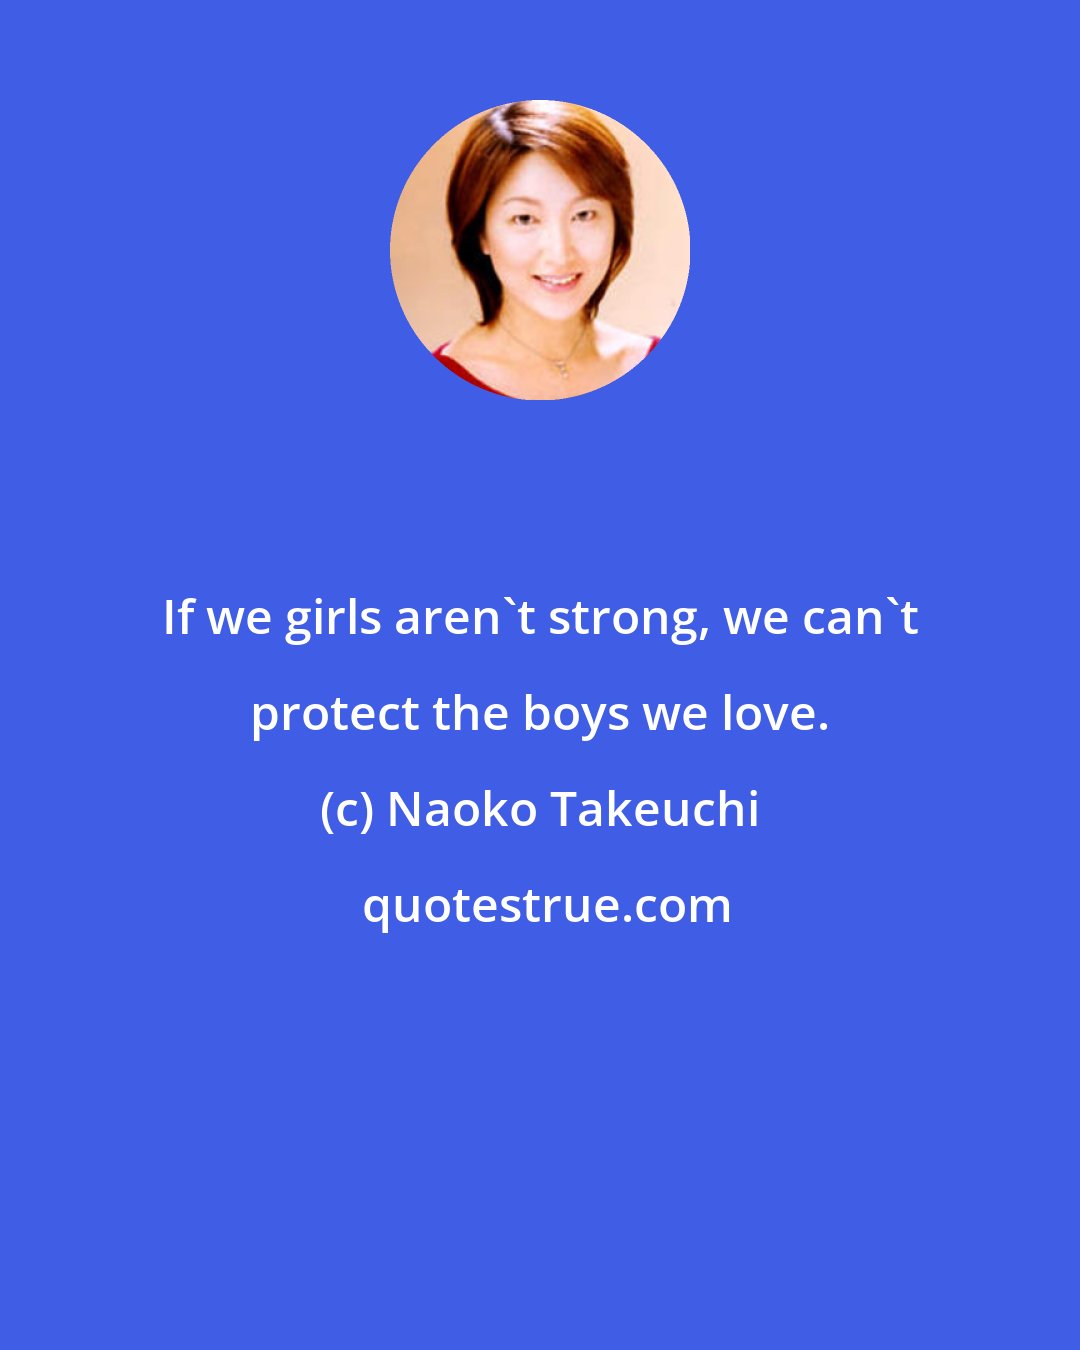 Naoko Takeuchi: If we girls aren't strong, we can't protect the boys we love.